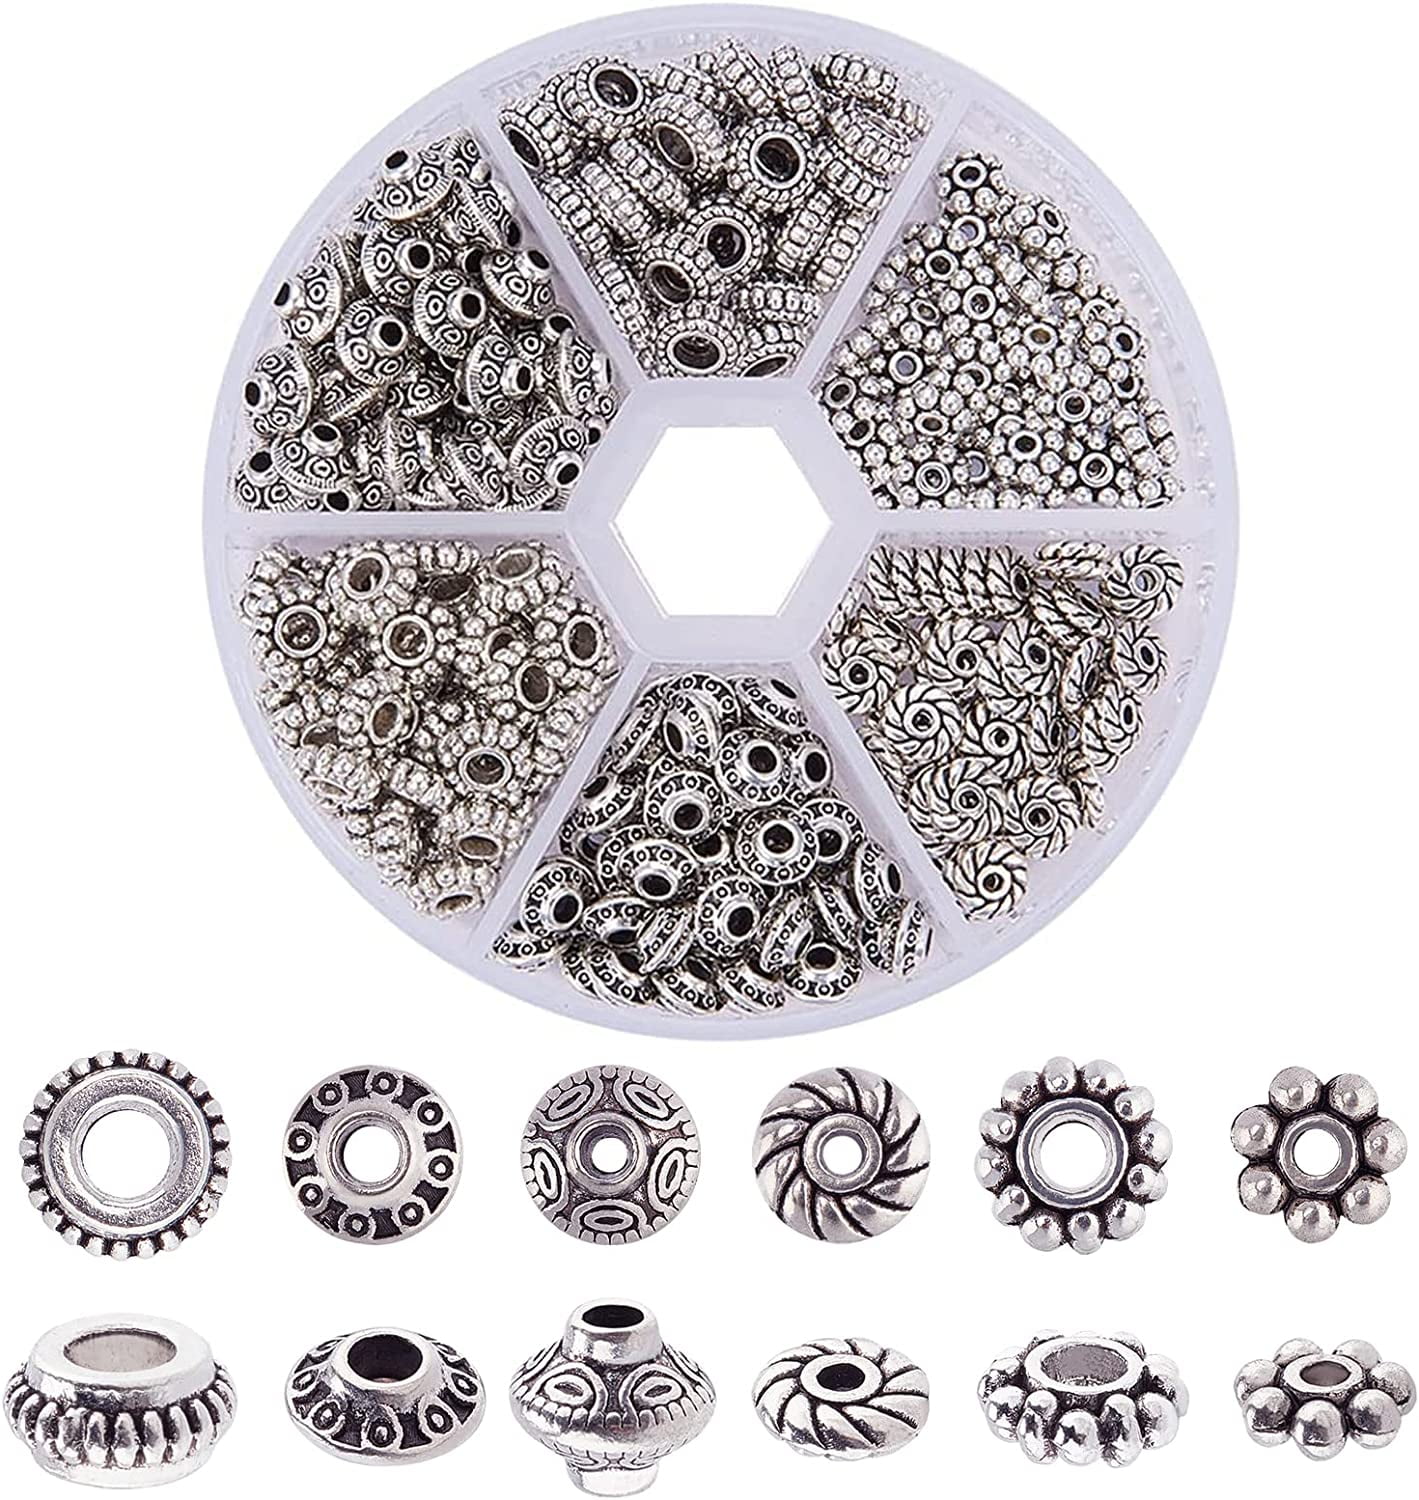 Spacer Bead Caps, 200 Pcs Tibetan Style Flower Bead Caps Filigree Petal Bead Caps Spacers for DIY Jewelry Making Supplies, 7 x 3.5 mm, Hole: 1.8 mm